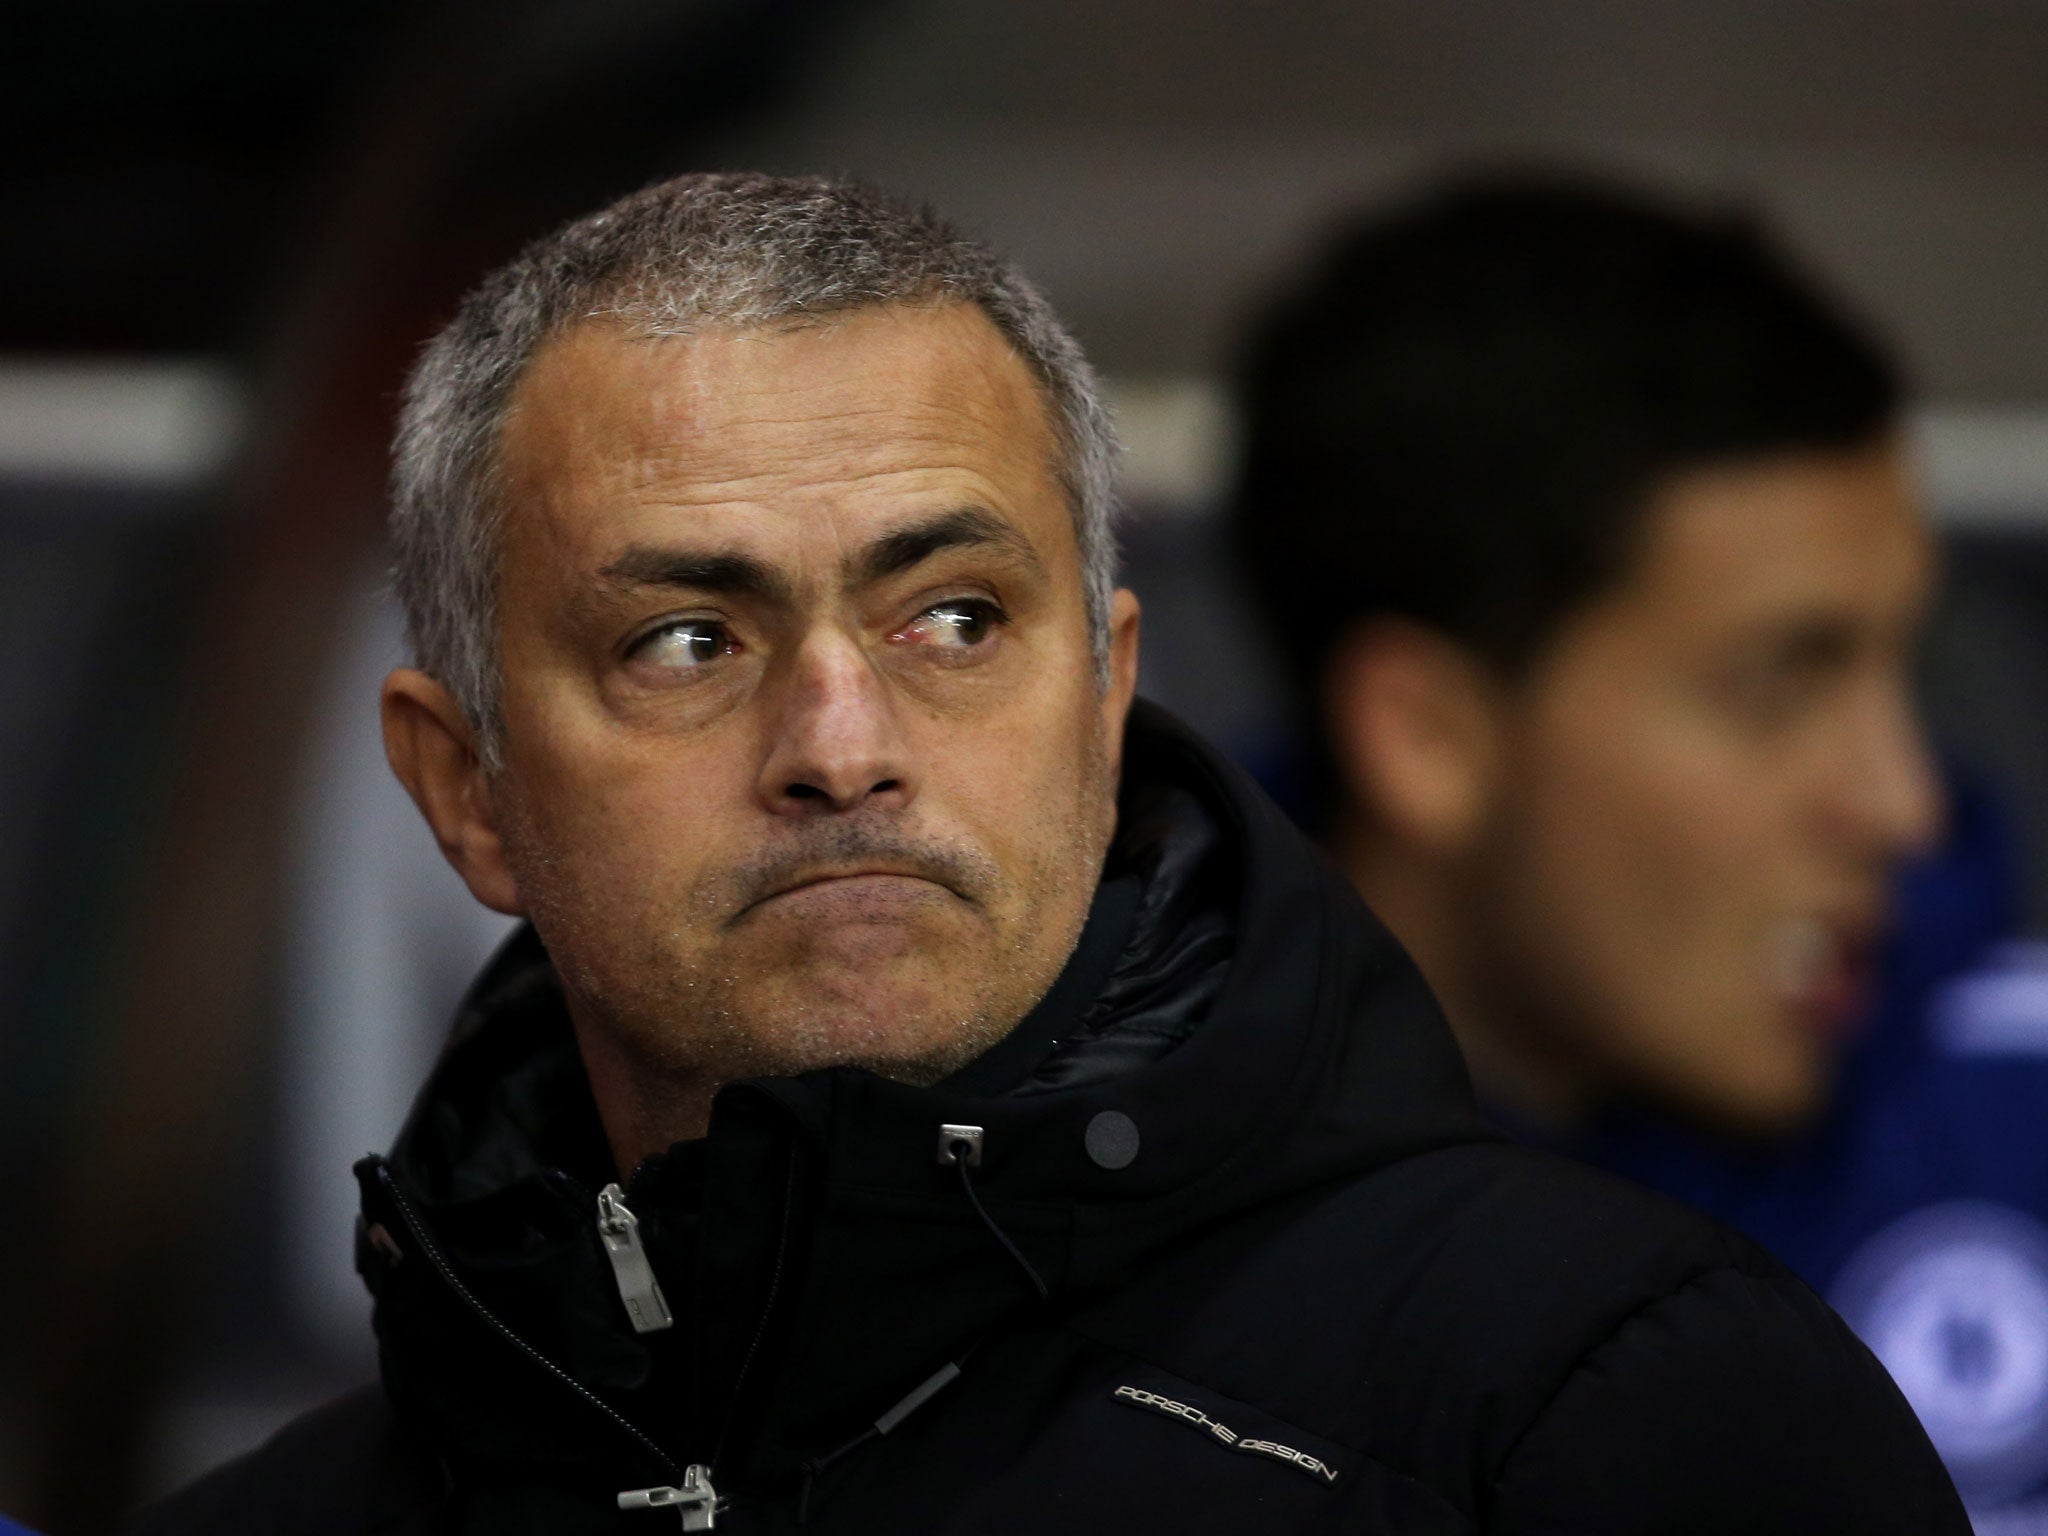 Jose Mourinho fears he could lose his unbeaten streak over Arsene Wenger if his Chelsea side fail to kill off the game against Arsenal on Monday night